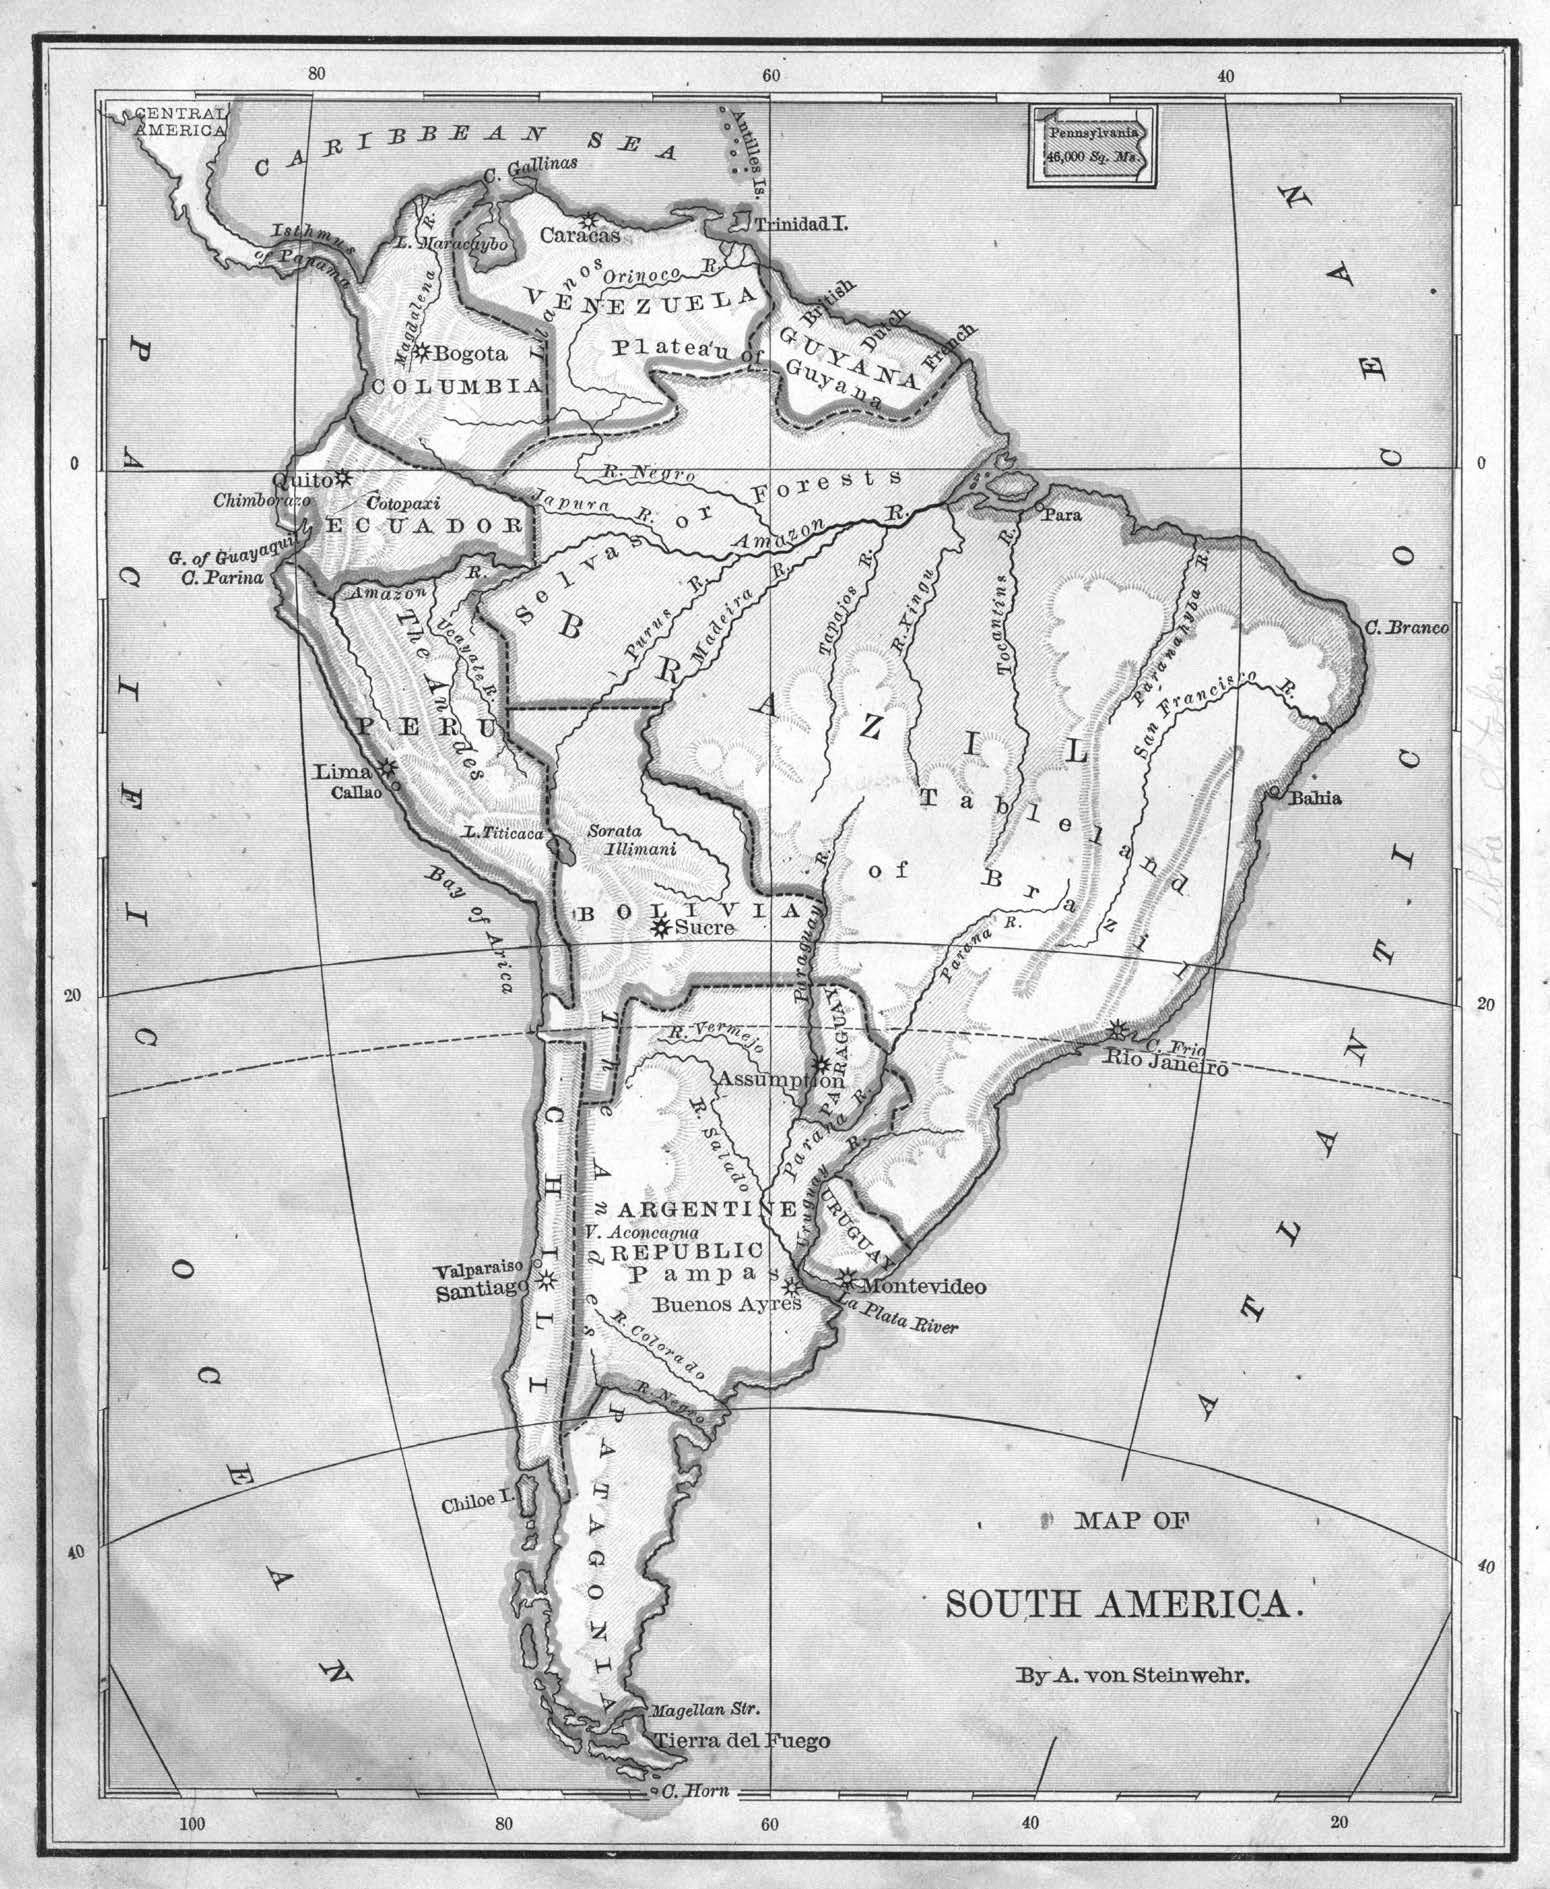 Map of South America, by A. von Steinwehr. iStock Photo by Getty Images.